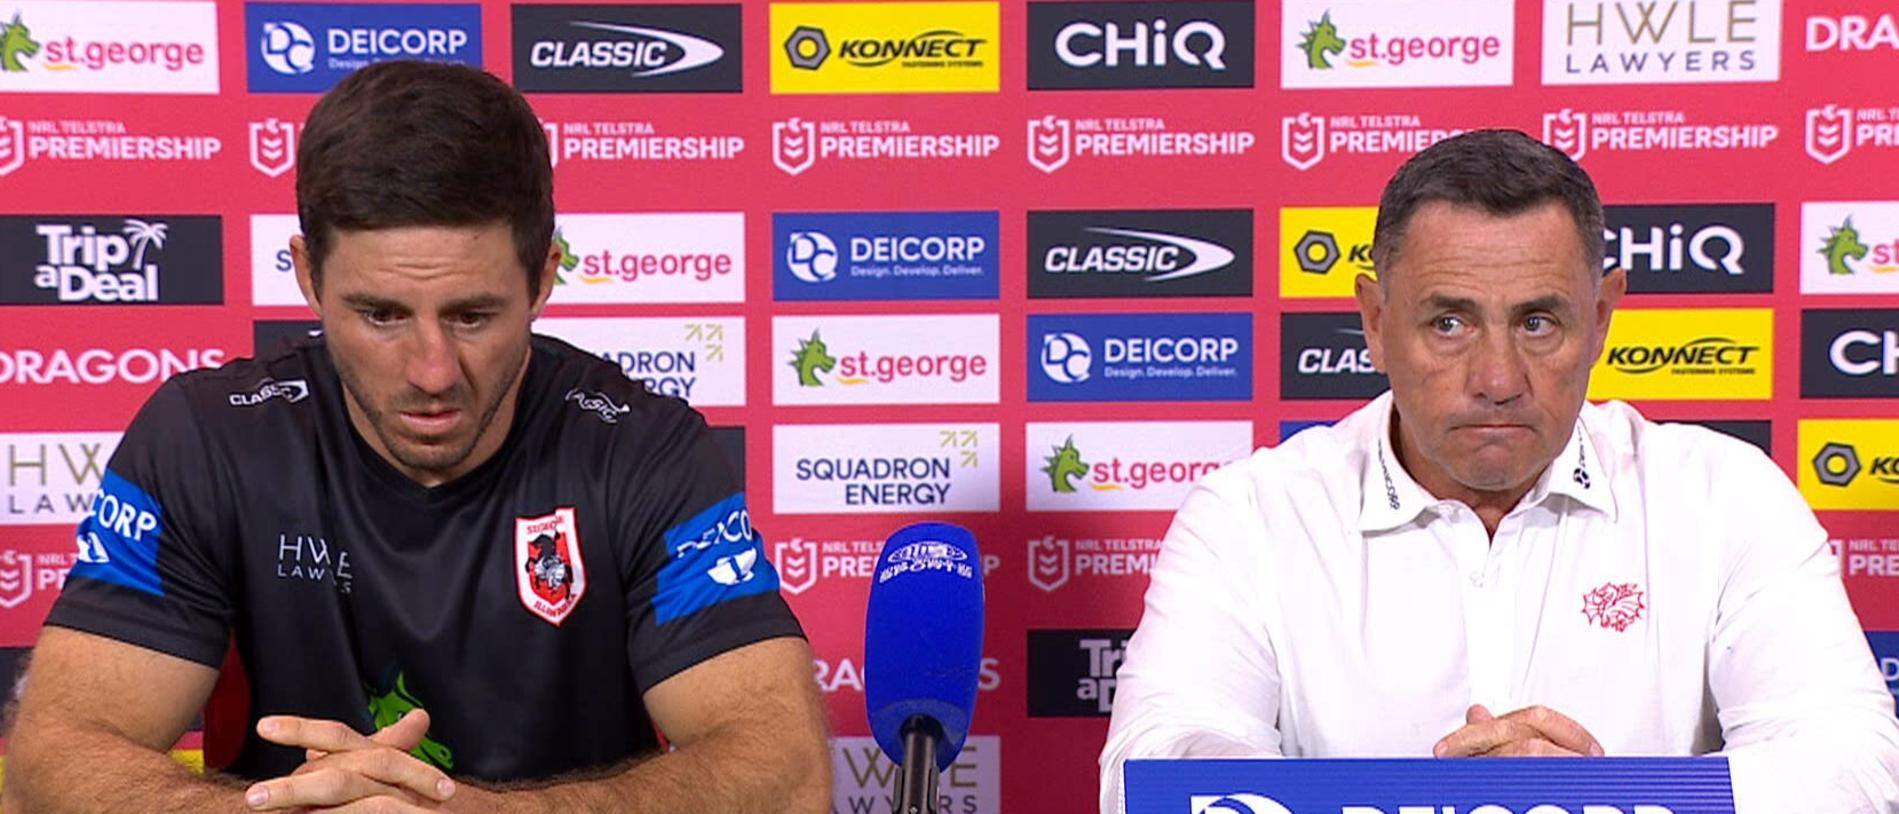 The Dragons vs Roosters press conference.